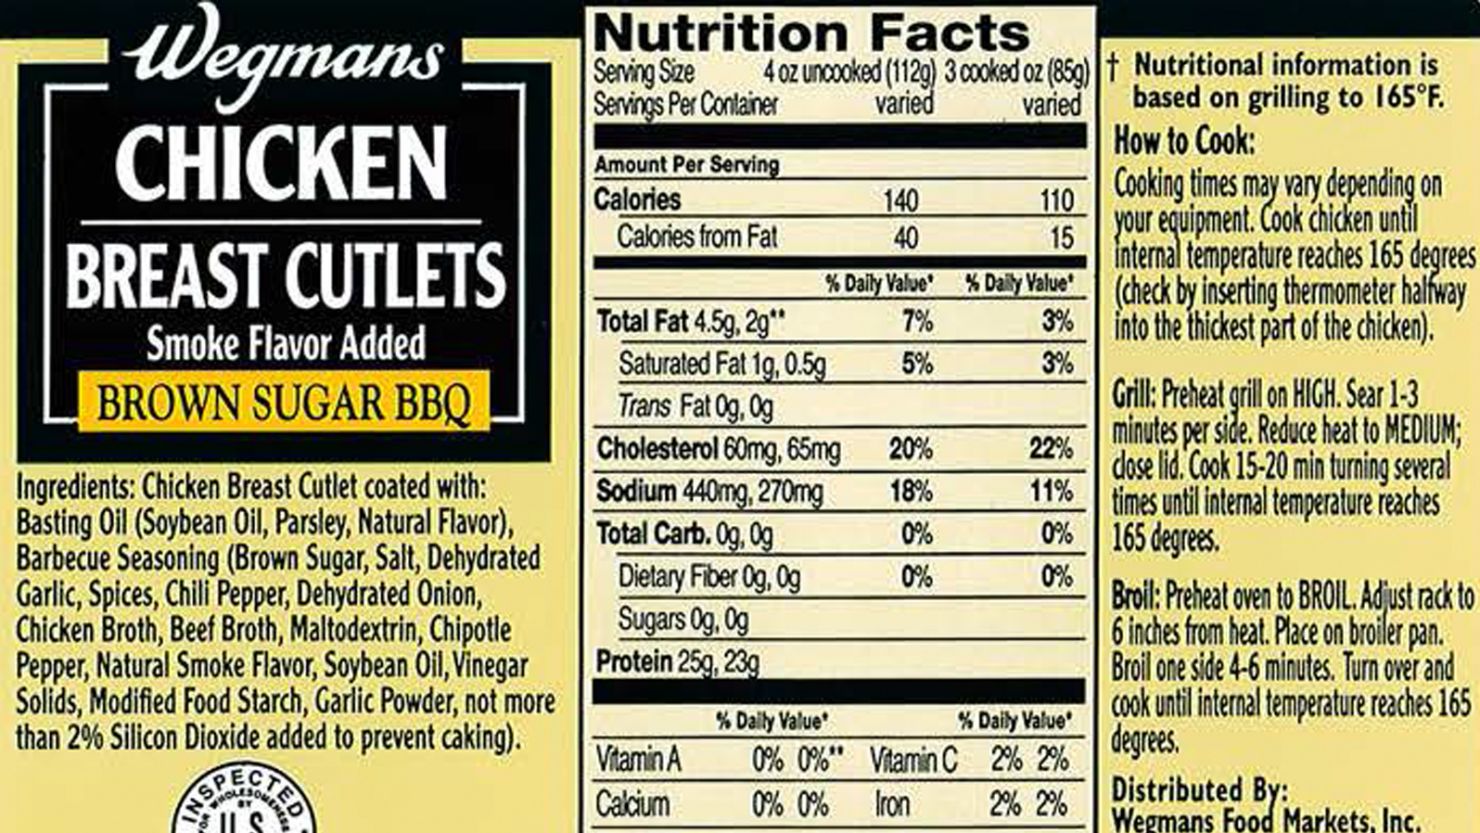 Wegmans this week recalled more than 1,000 pounds of chicken products that were packaged without being checked by federal inspectors.